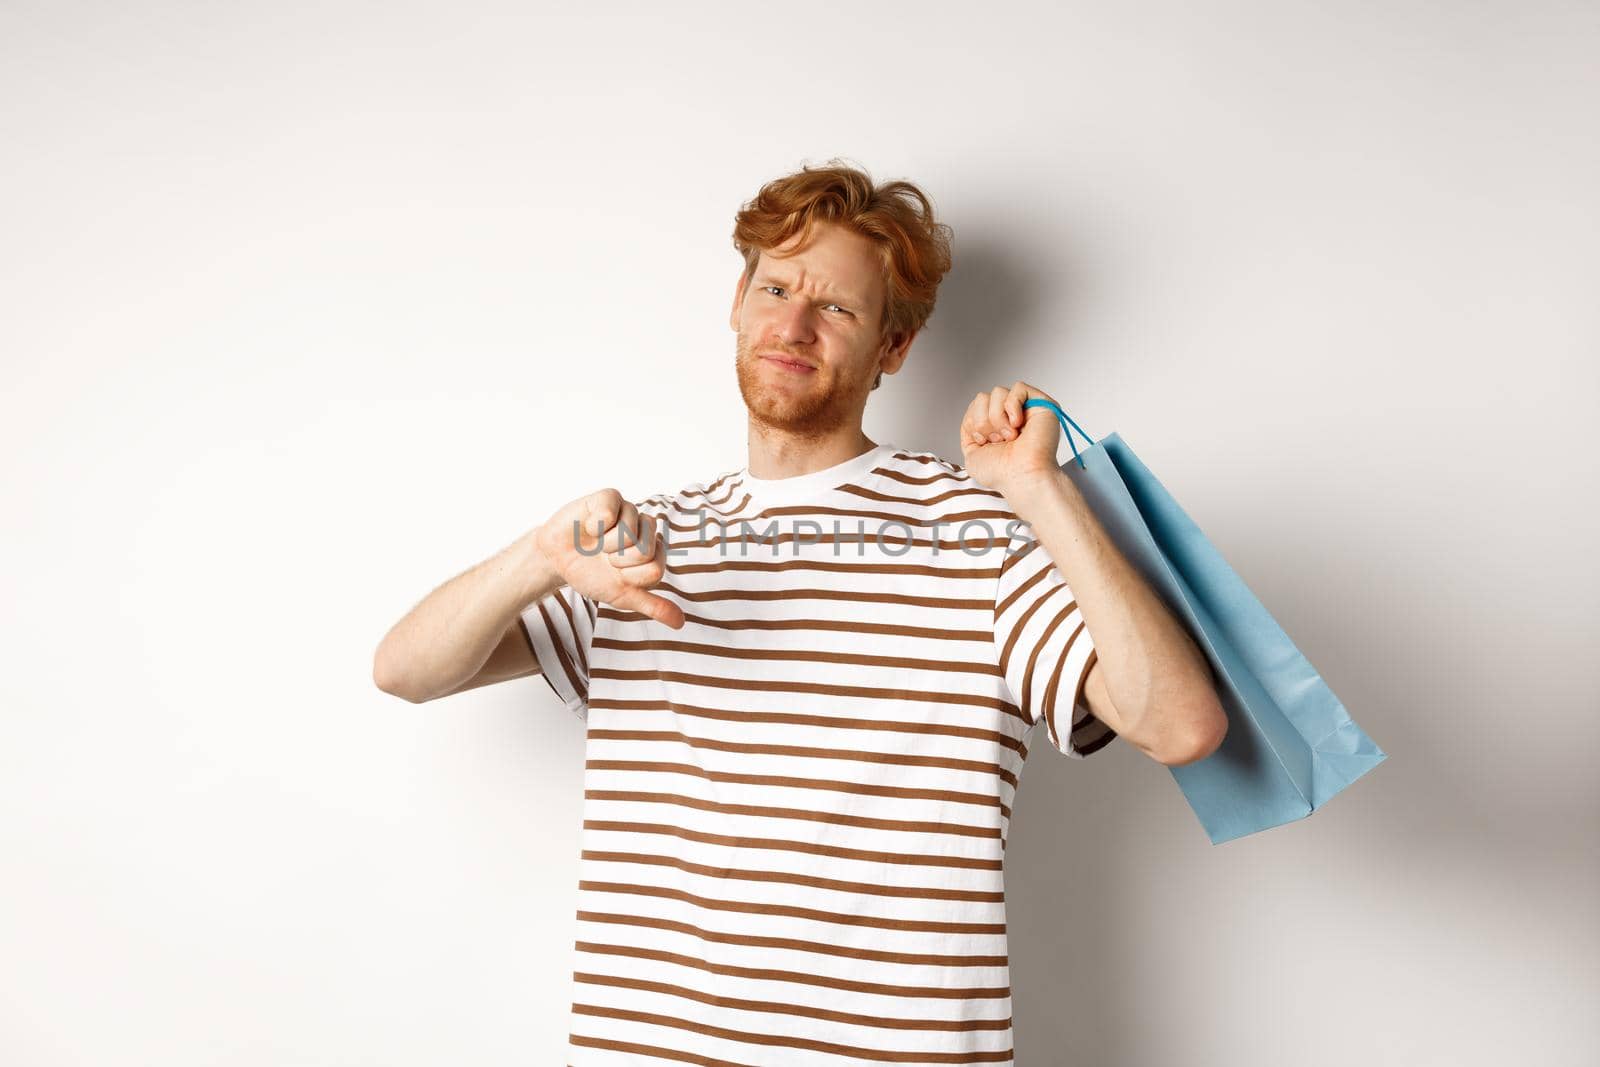 Disappointed young man with red hair and beard showing thumbs-down after bad shopping experience, holding bag over shoulder and frowning upset, white background.